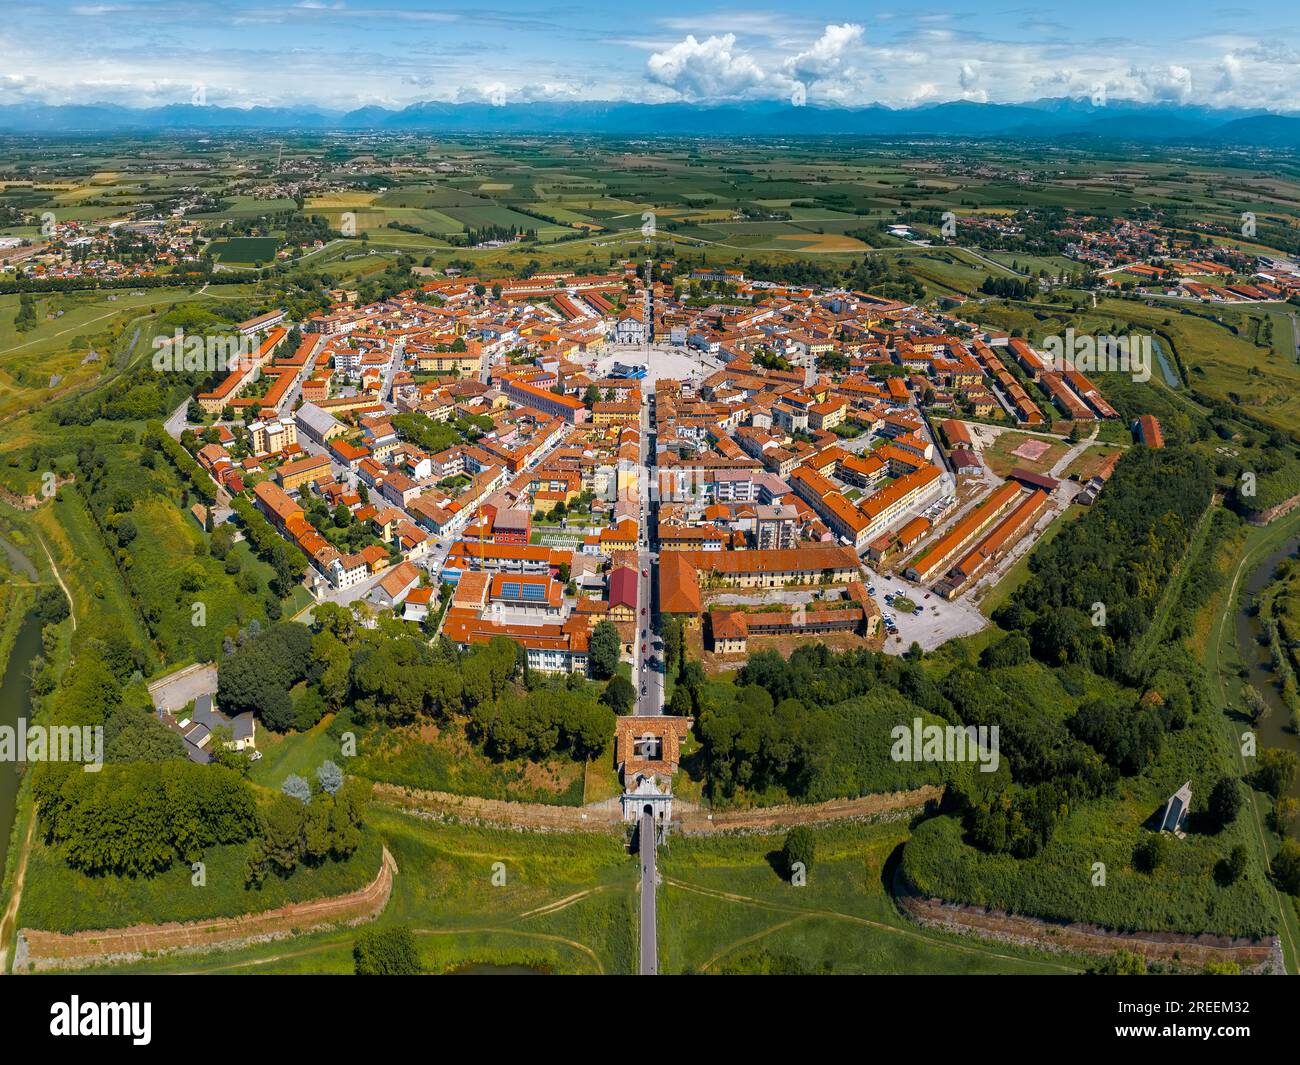 Palmanova is an Italian town what  founded in 1593, features a unique star-shaped layout with well-preserved Renaissance architecture and historic cha Stock Photo